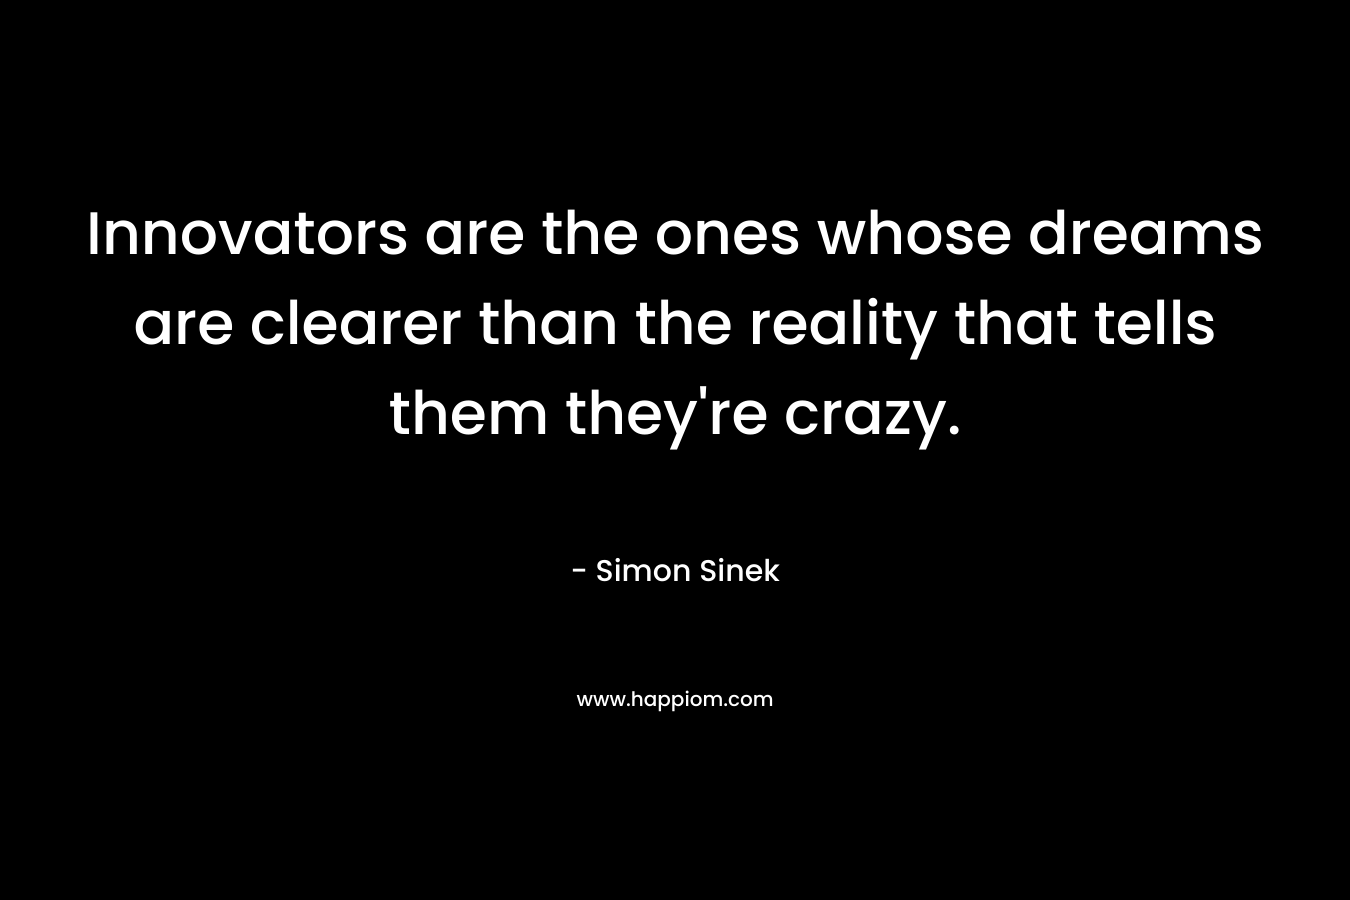 Innovators are the ones whose dreams are clearer than the reality that tells them they're crazy.